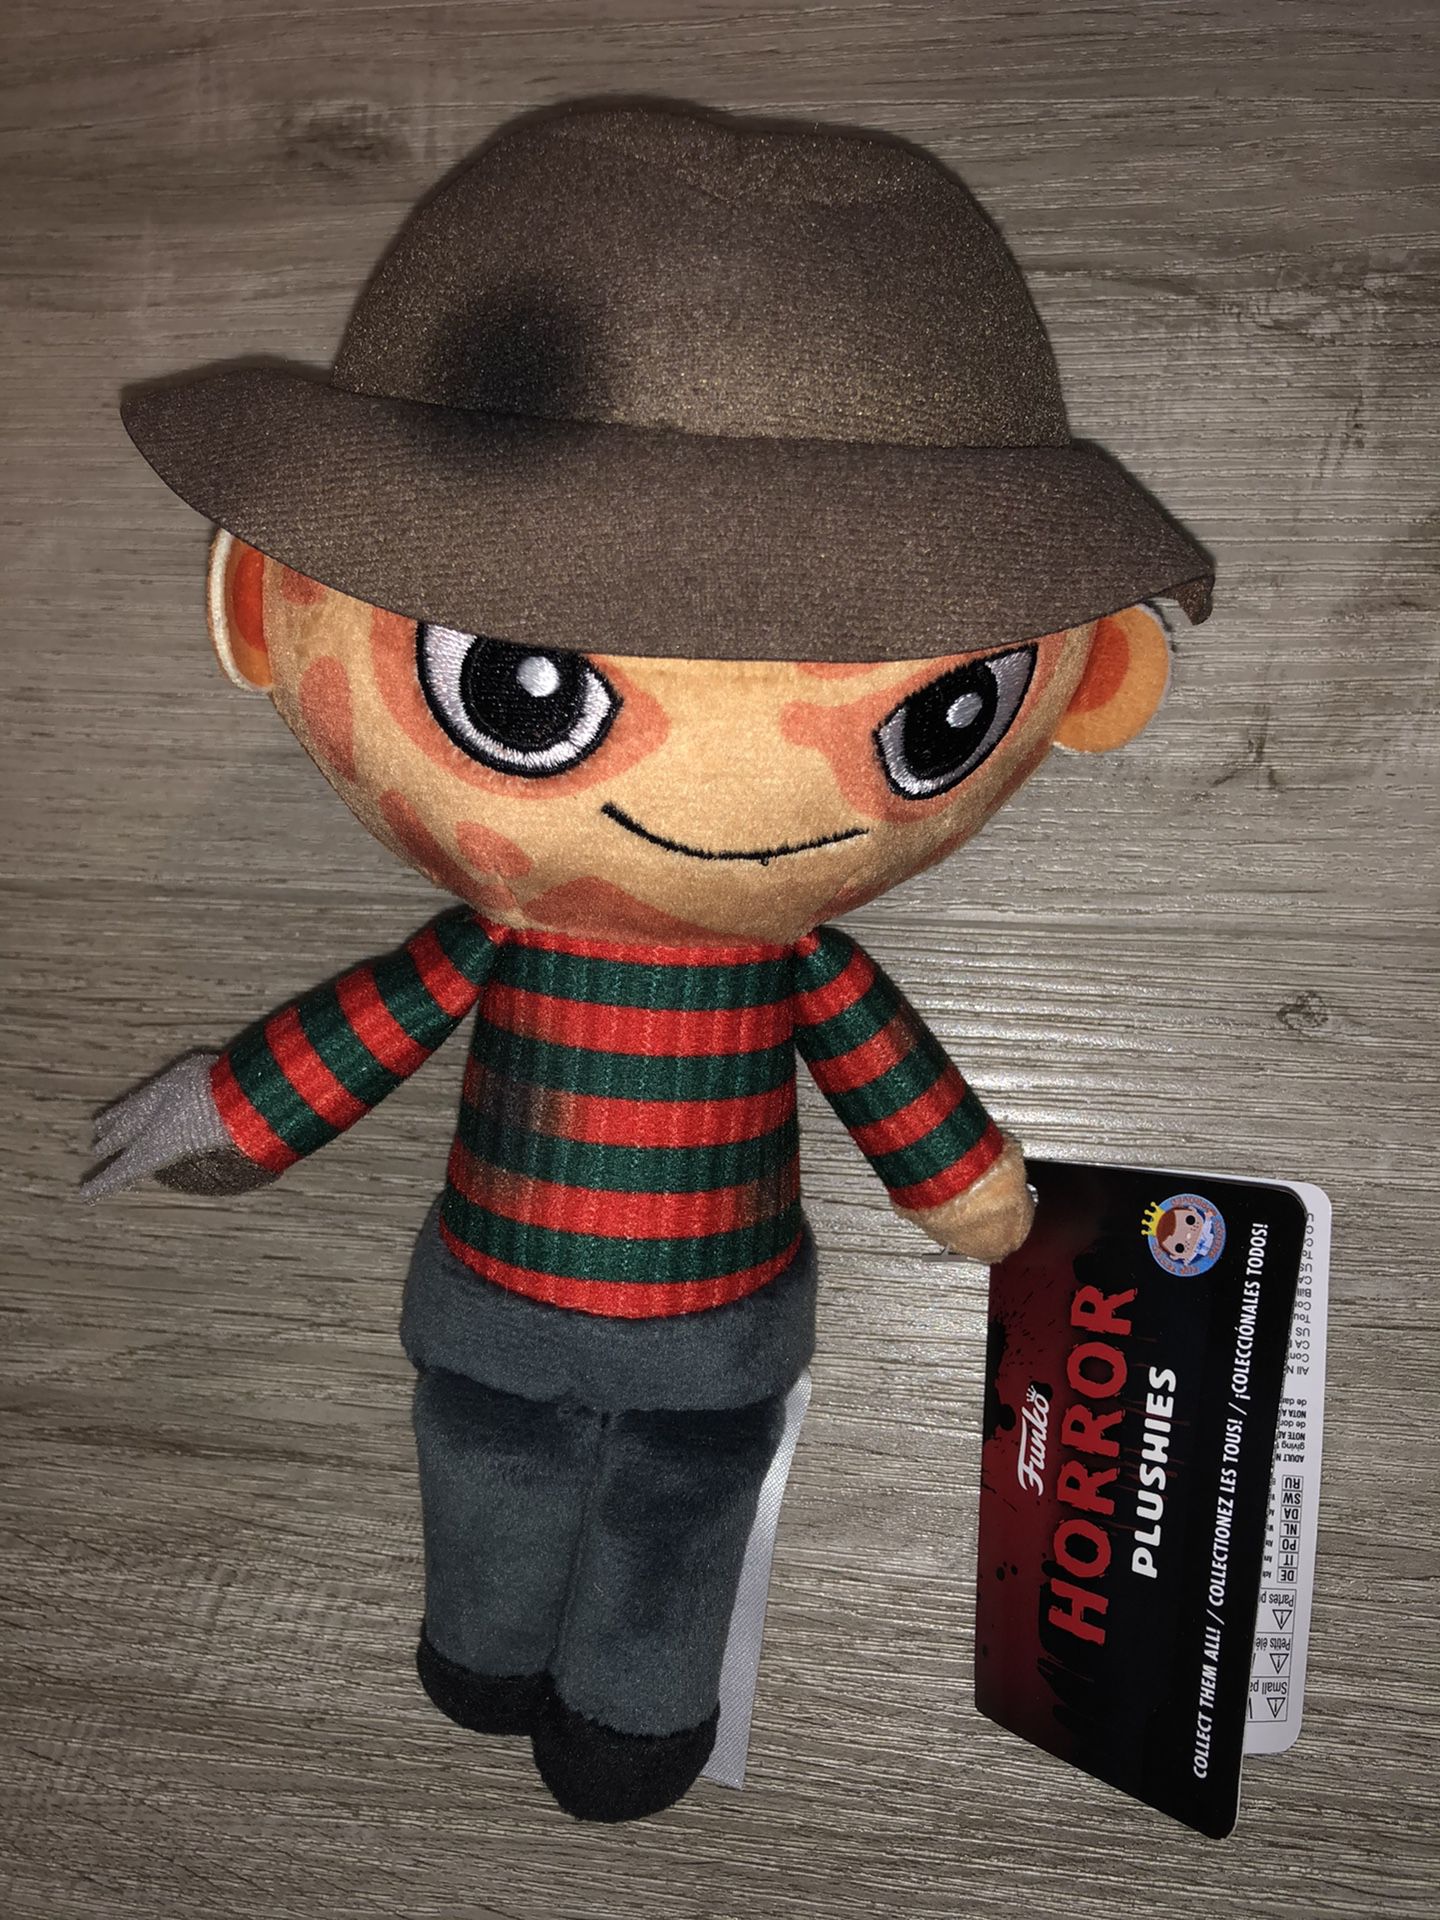 A Nightmare on Elm Street Freddy Krueger 8" Horror Plushies Collectible New